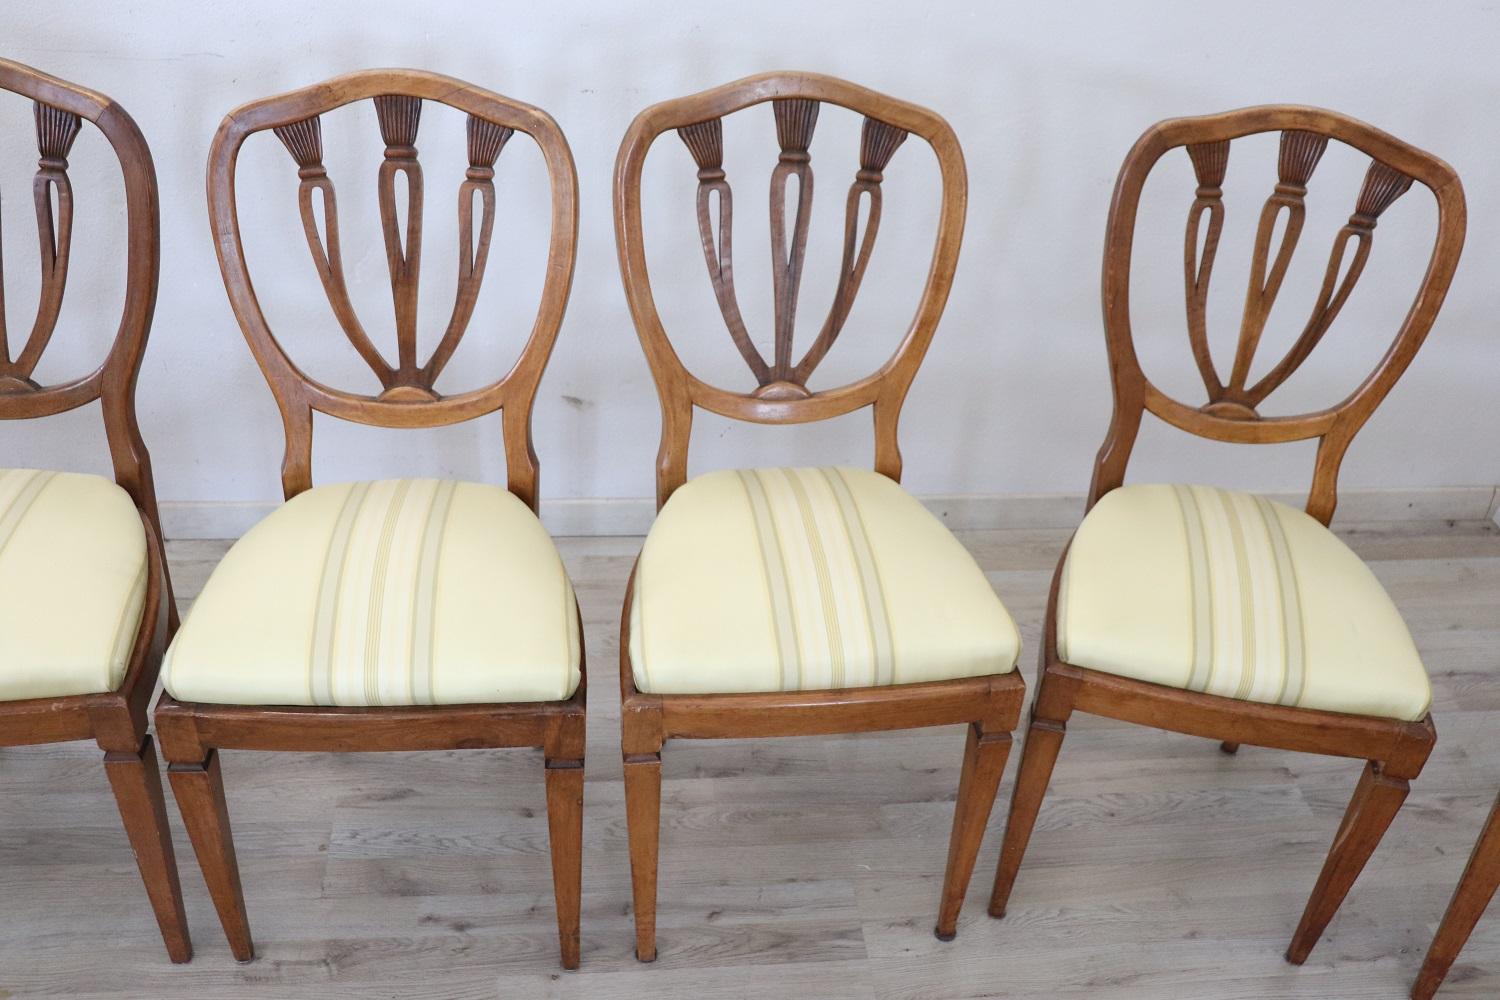 Carved Elegant 19th Century Italian Walnut Antique Dining Room Chairs, Set of Eight